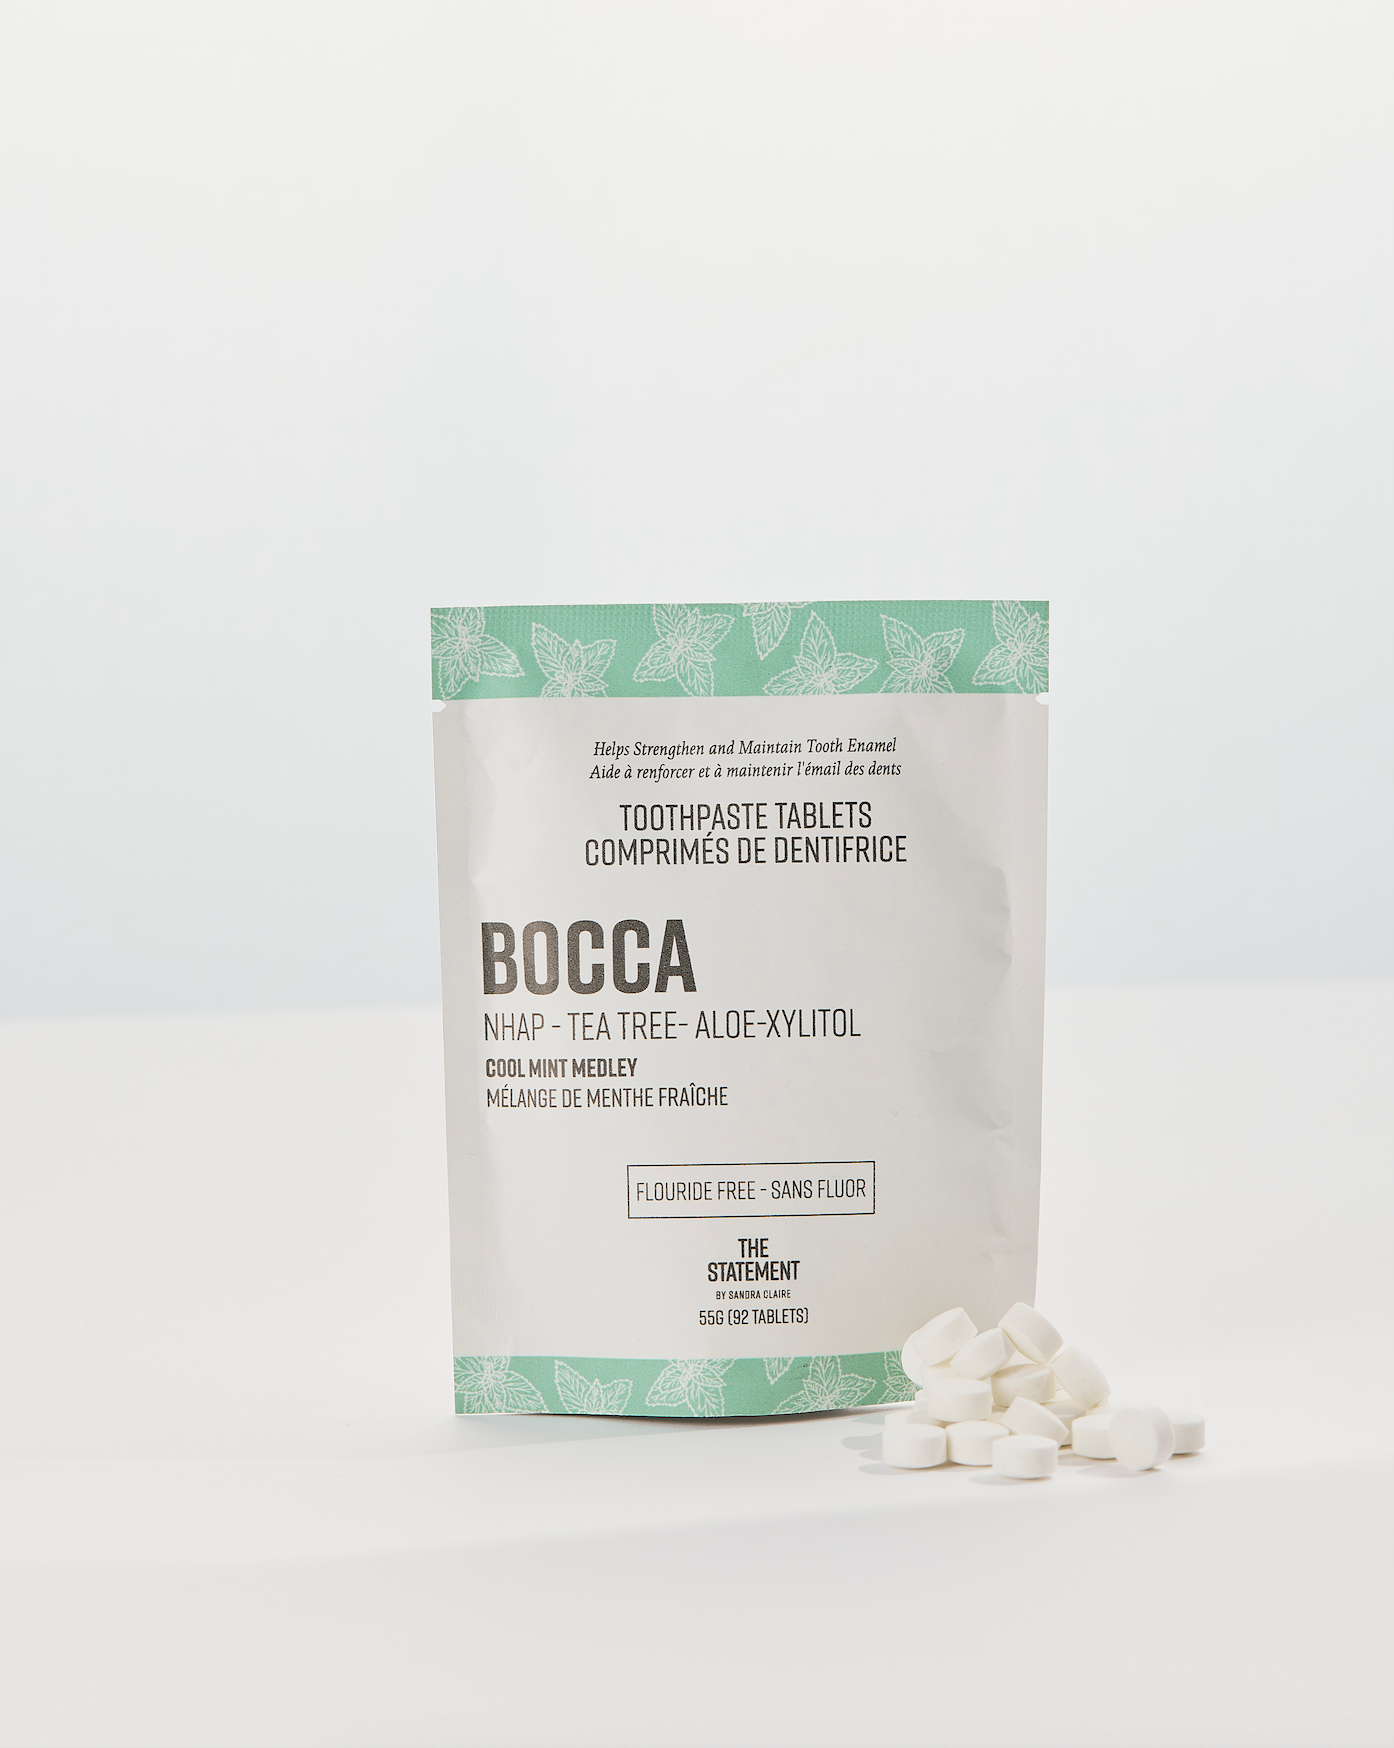 Bocca Toothpaste Tablets - 96 tablets